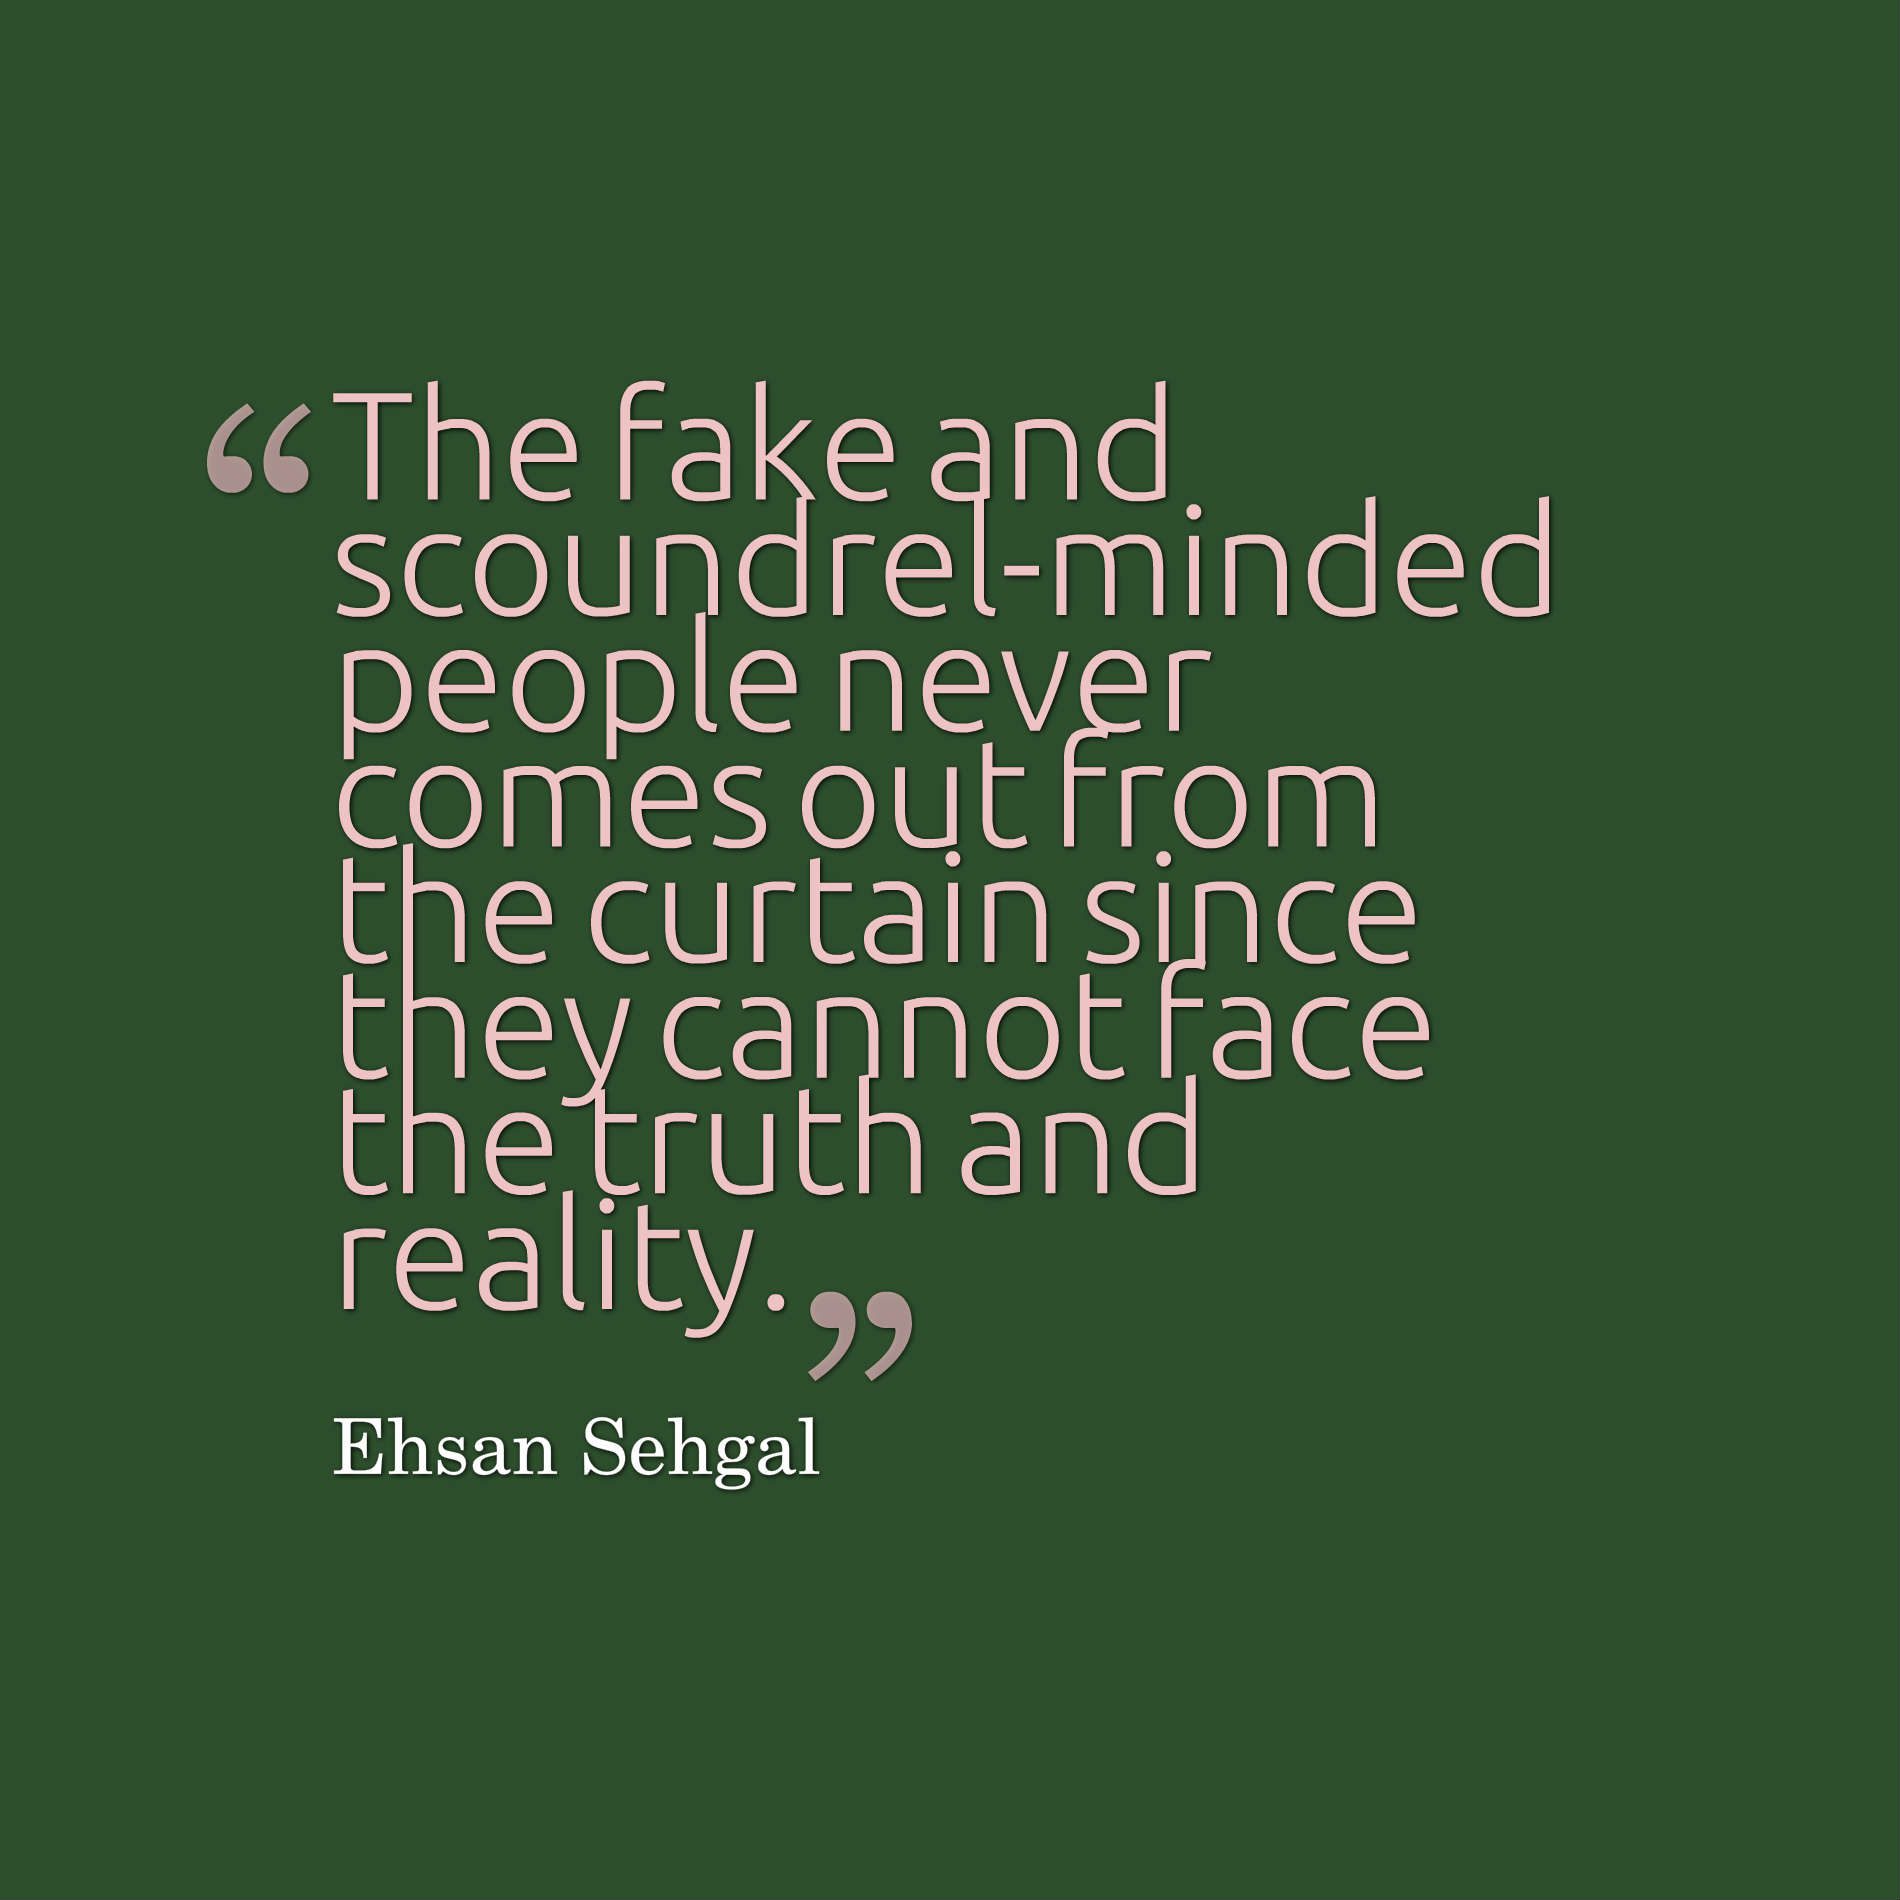 The fake and scoundrel-minded people never comes out from the curtain since they cannot face the truth and reality.